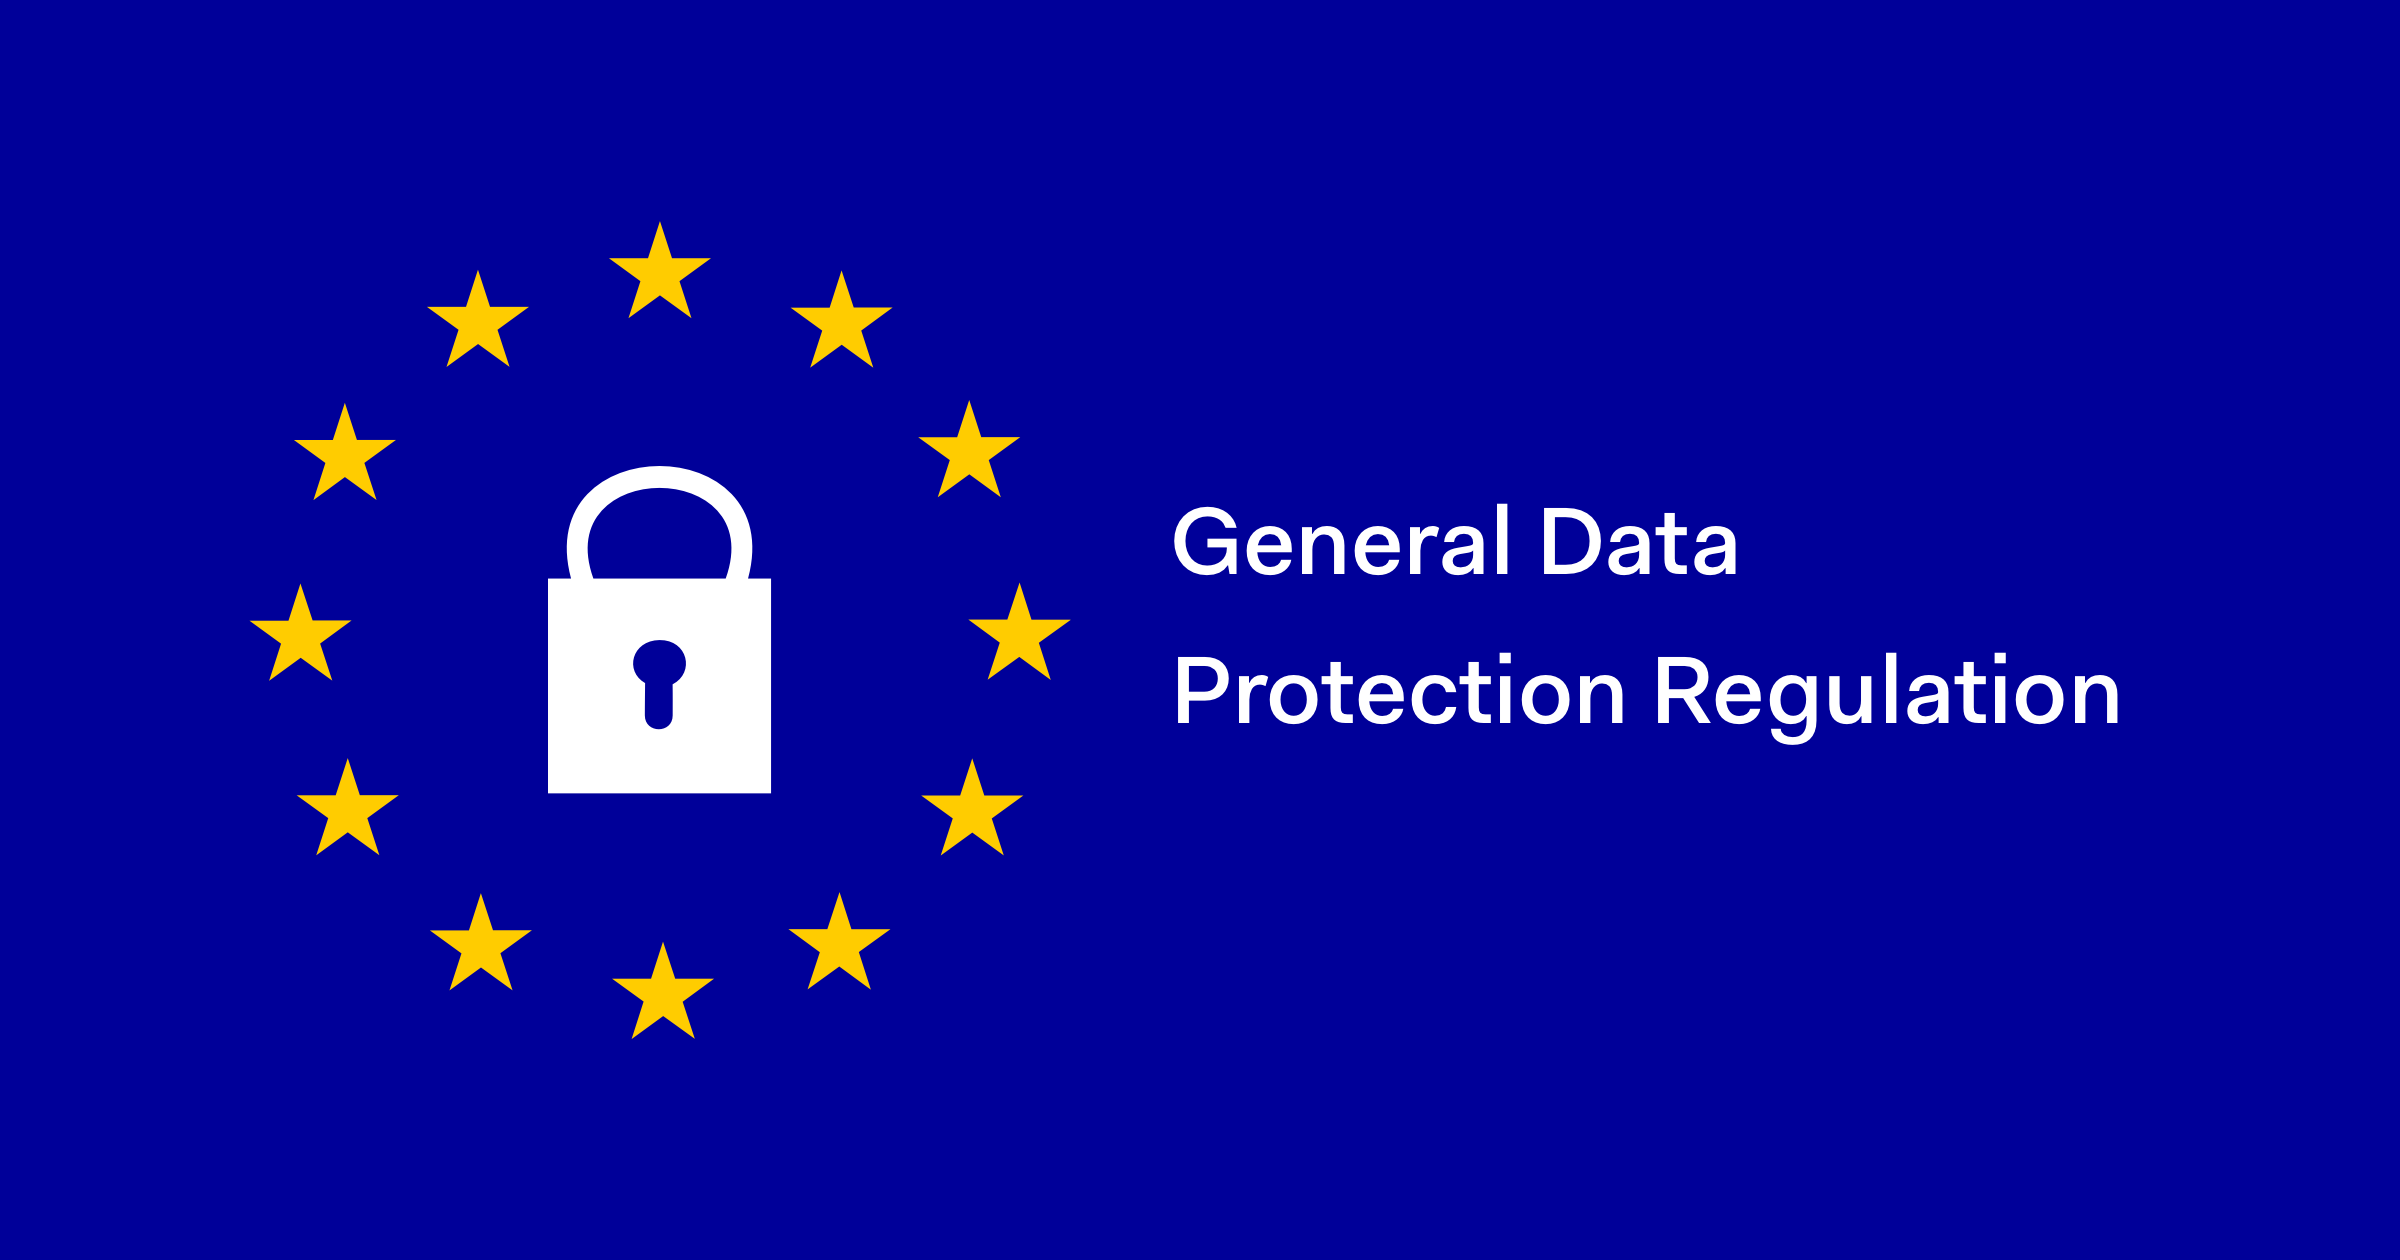 WHAT DOES GDPR GOVERN -